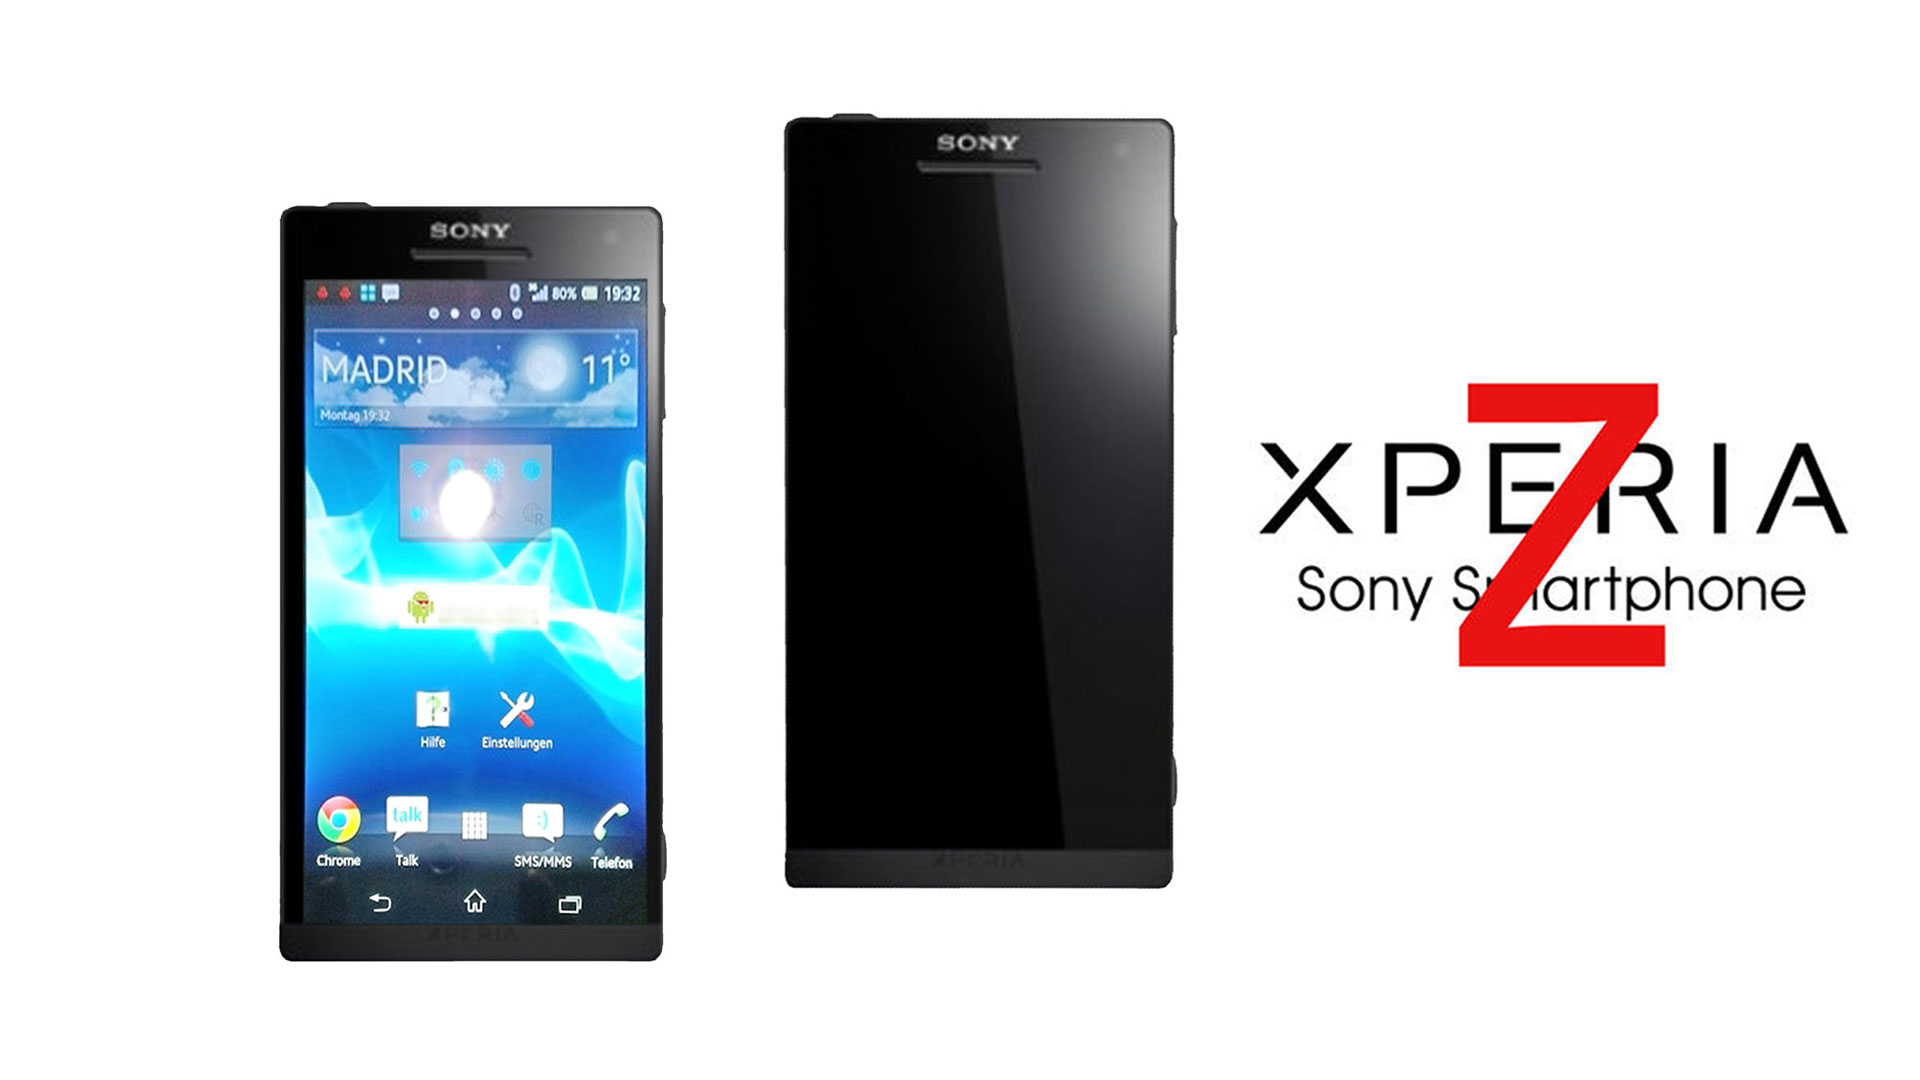 Sony Xperia Z With Android Jelly Bean - Sony Xperia Zs Price - HD Wallpaper 